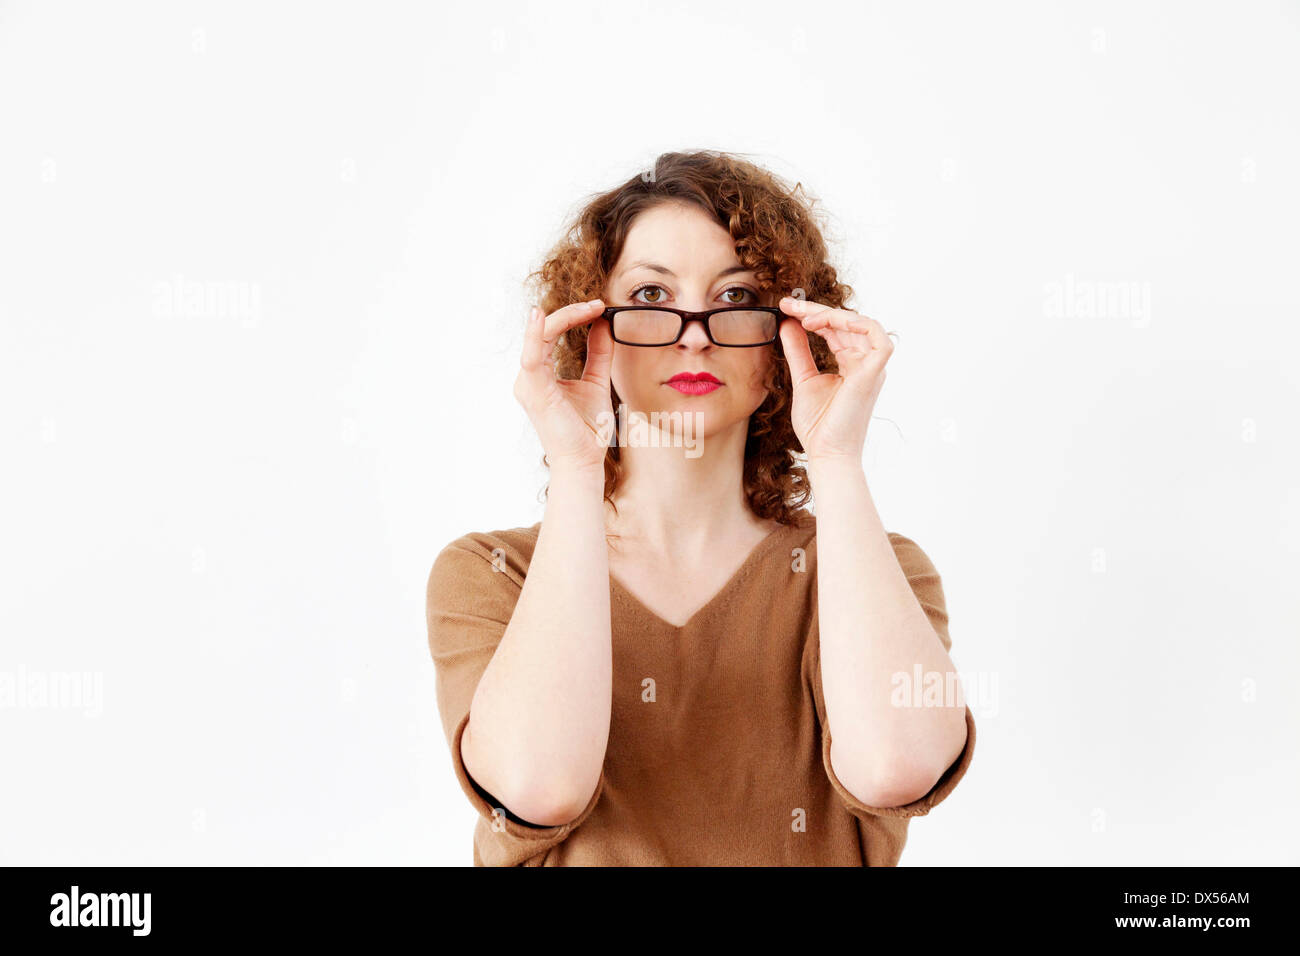 Young woman with glasses Stock Photo